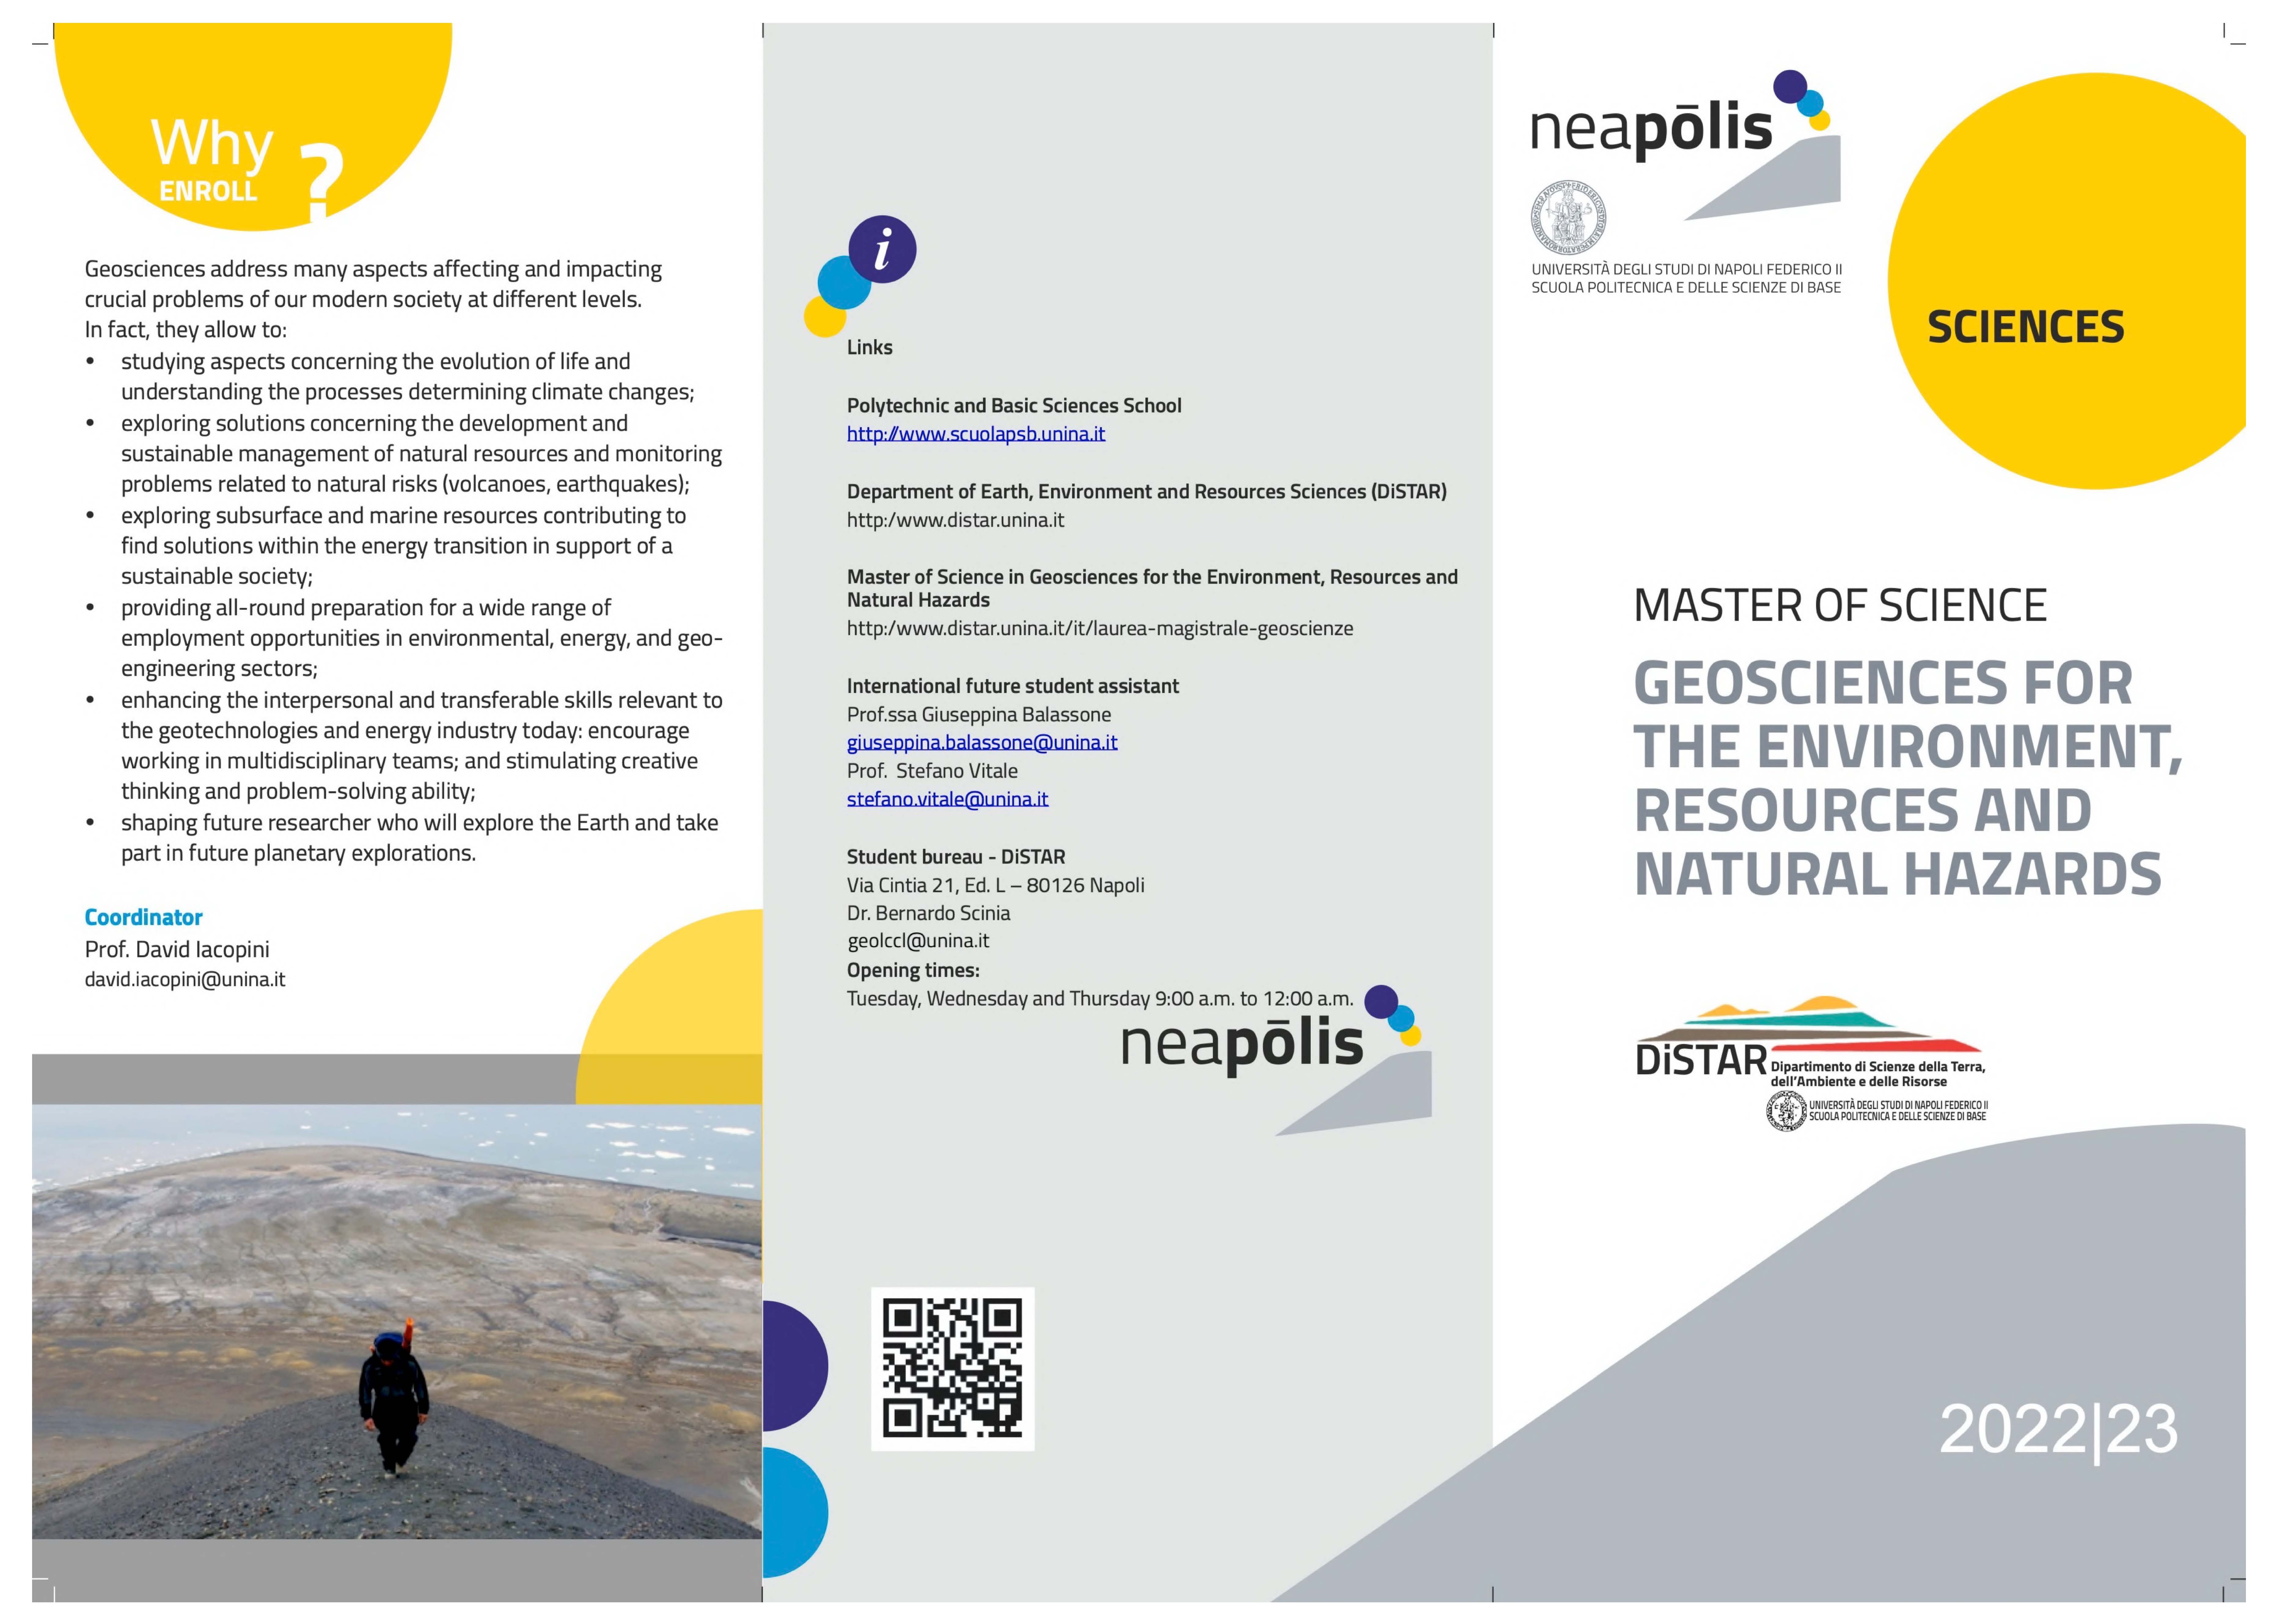 Flyer MS GEOSCIENCES FOR THE ENVIRONMENT RESOURCES AND NATURAL HAZARDS en 19 lug 2022 Pagina 1